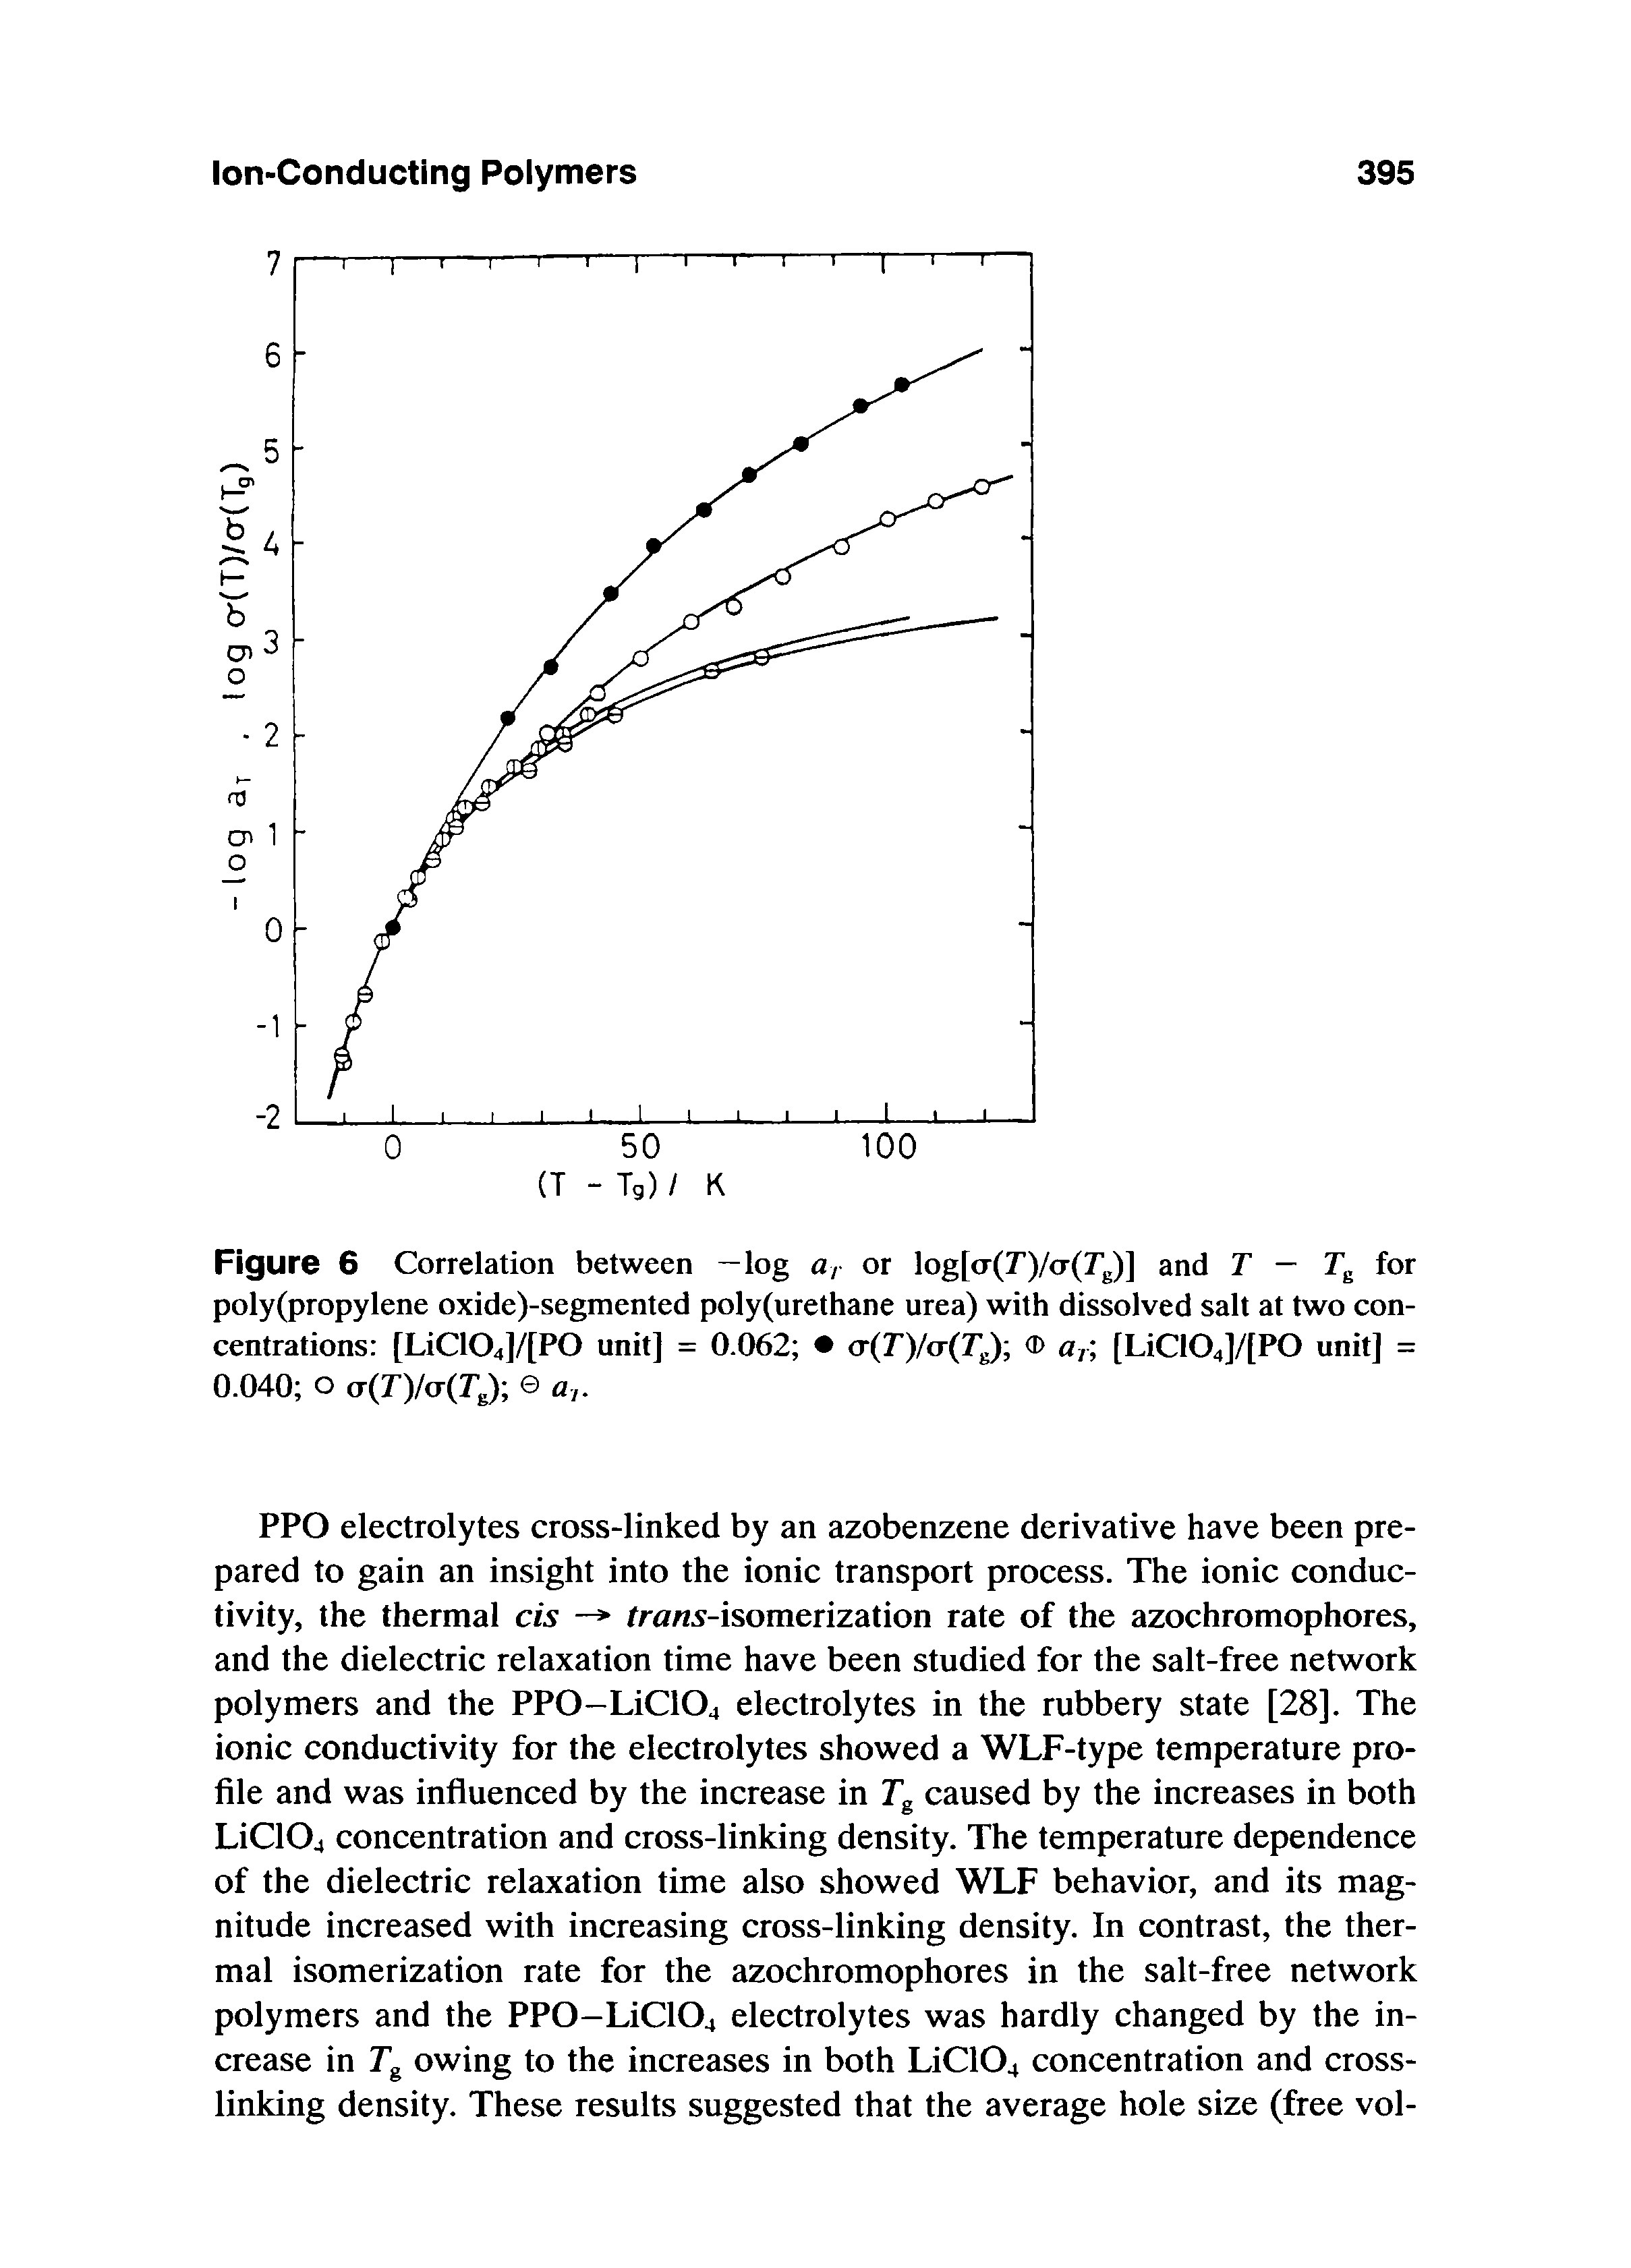 Figure 6 Correlation between —log a, or log[a(7 )/a(7 g)] and T for poly(propylene oxide)-segmented poly(urethane urea) with dissolved salt at two concentrations [LiC104]/[P0 unit] = 0.062 (D a, [LiC104]/[PO unit] =...